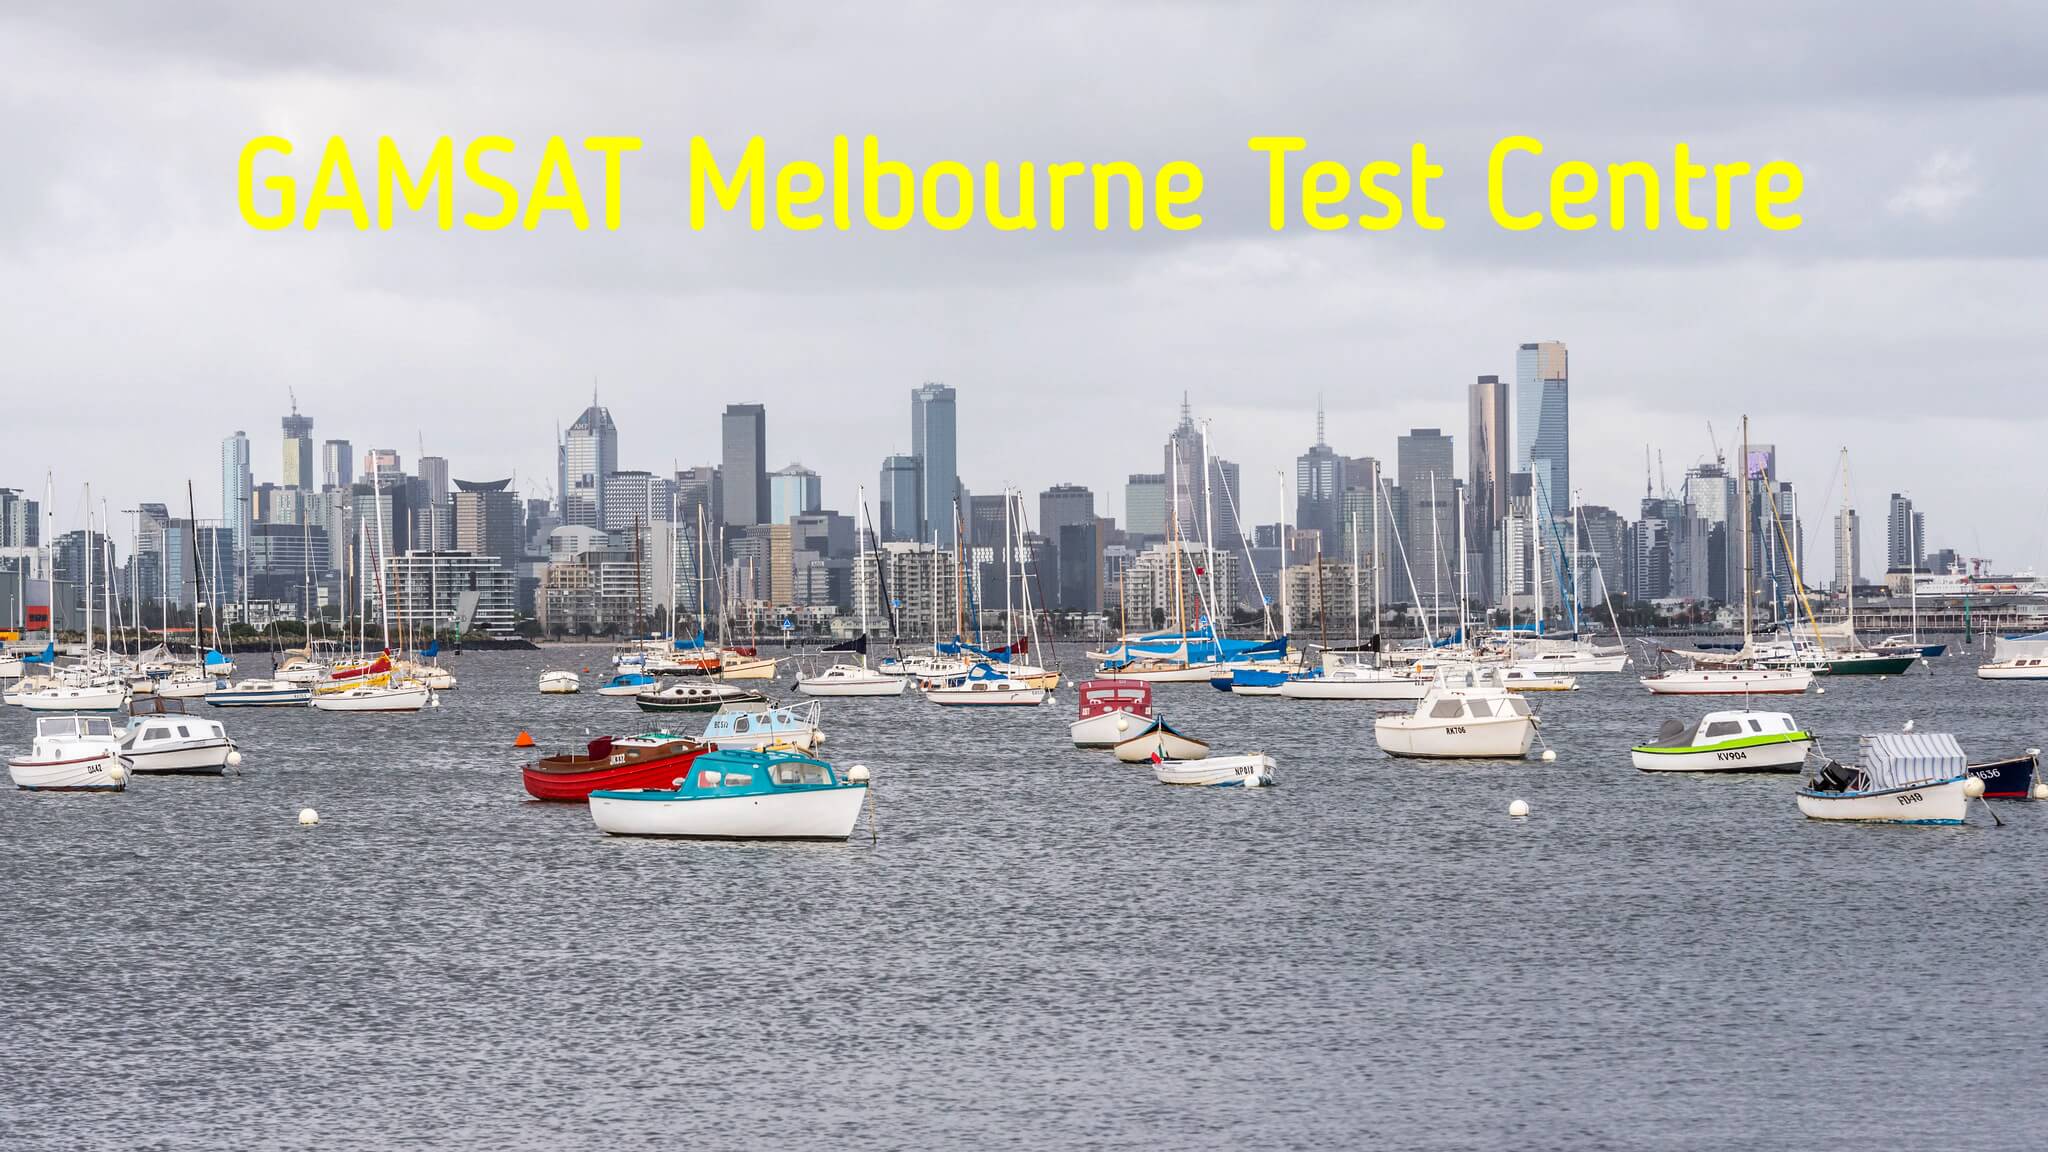 Where is GAMSAT held in Melbourne?